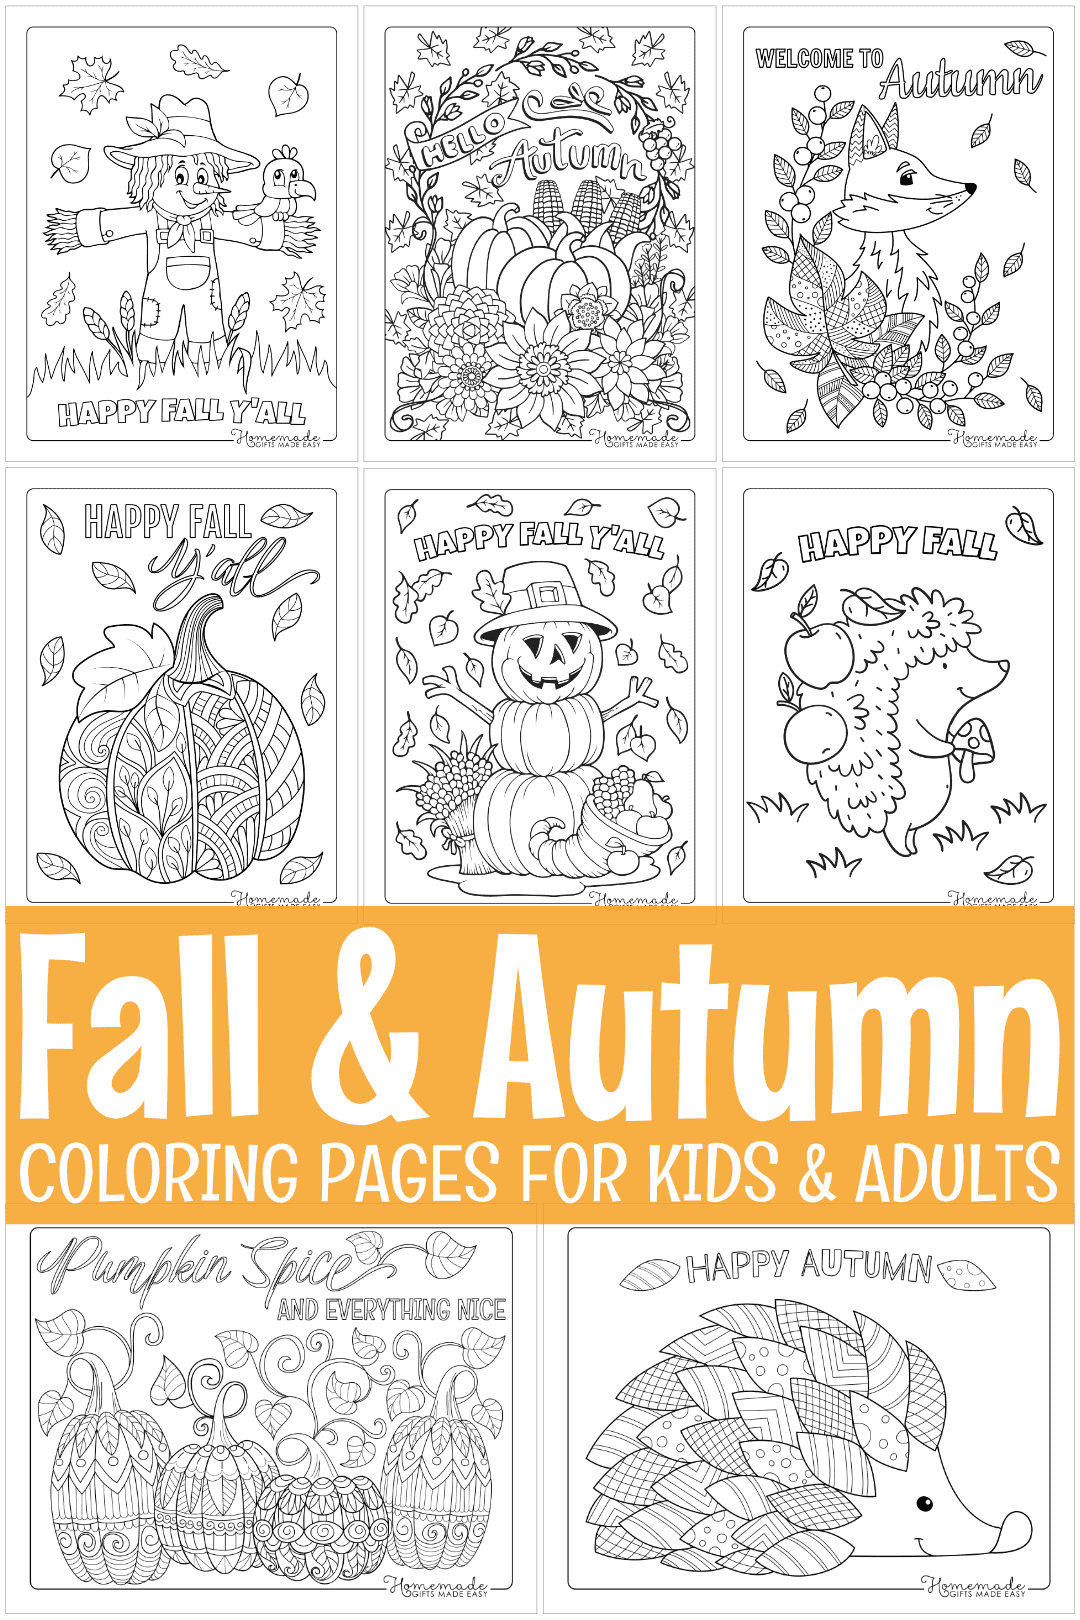 20 Best Autumn & Fall Coloring Pages   Free PDF Printables for Kids